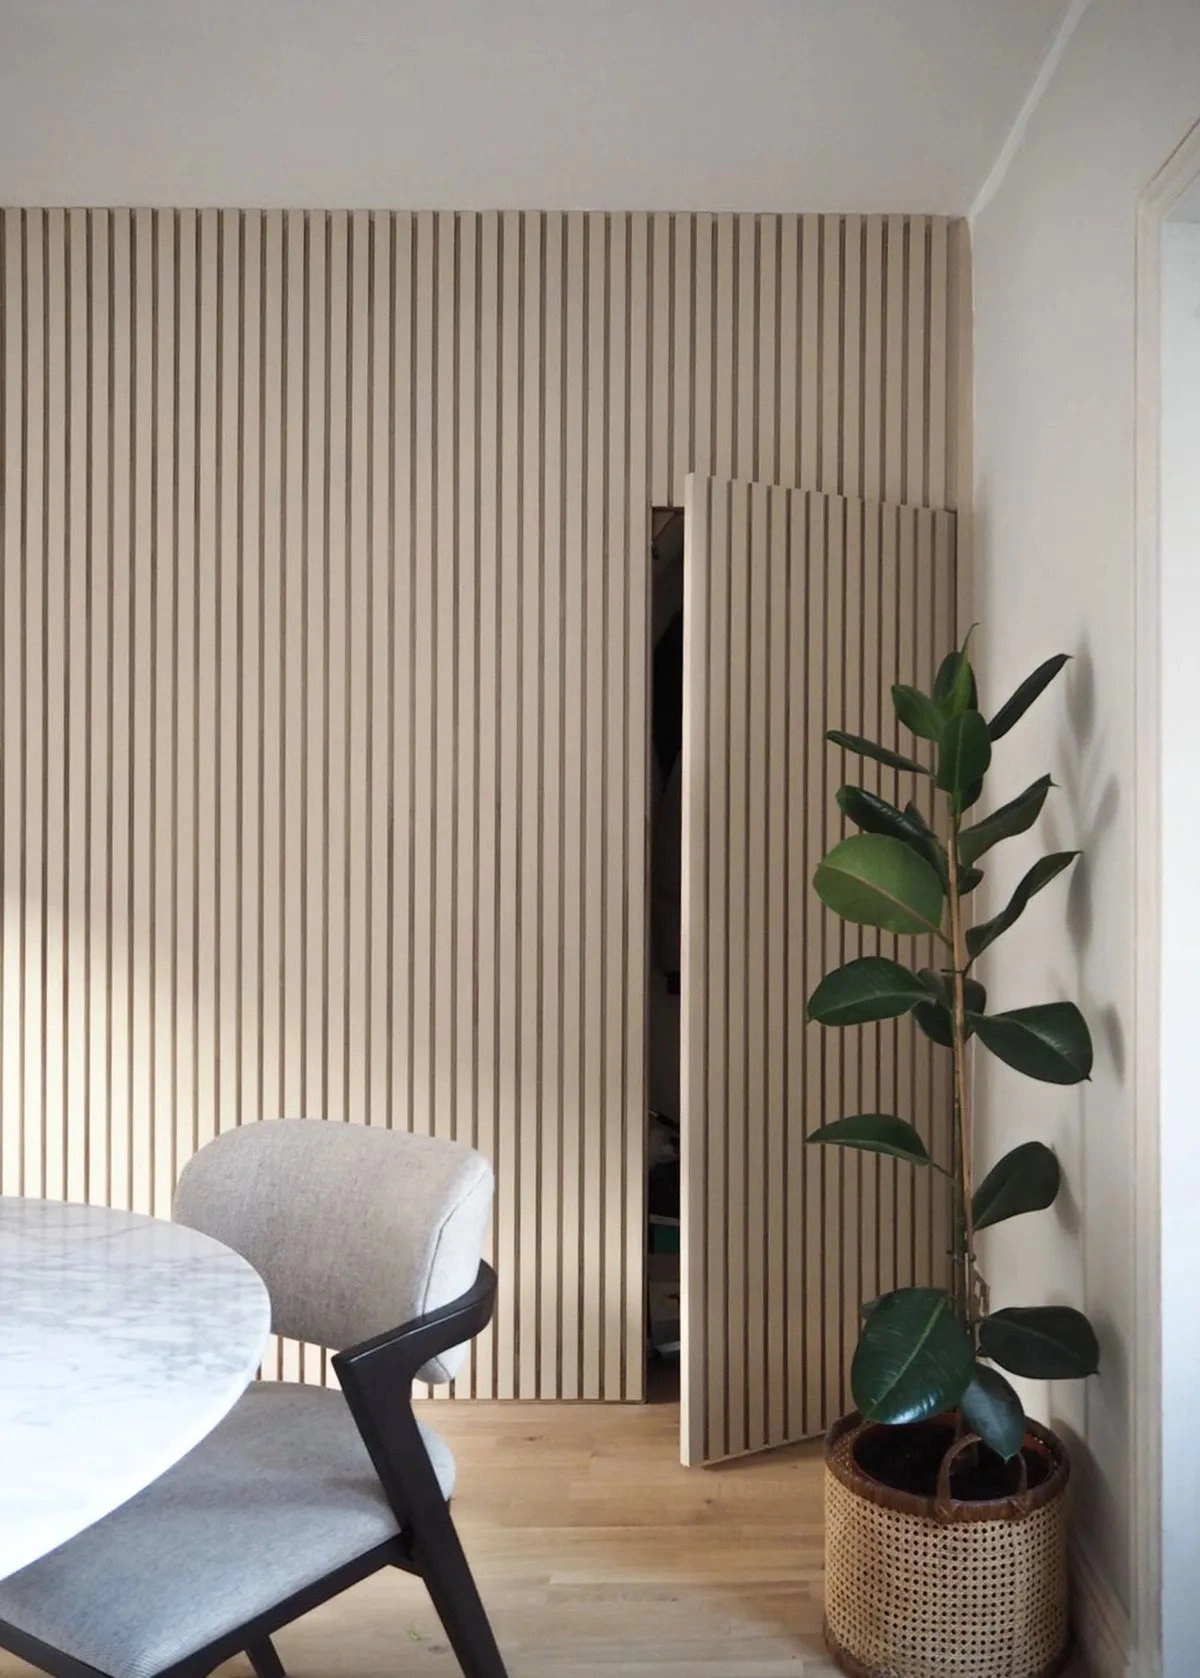 Slatted wall panelling being used to conceal a hidden door, which can be used as a storage cupboard or as an en suite.